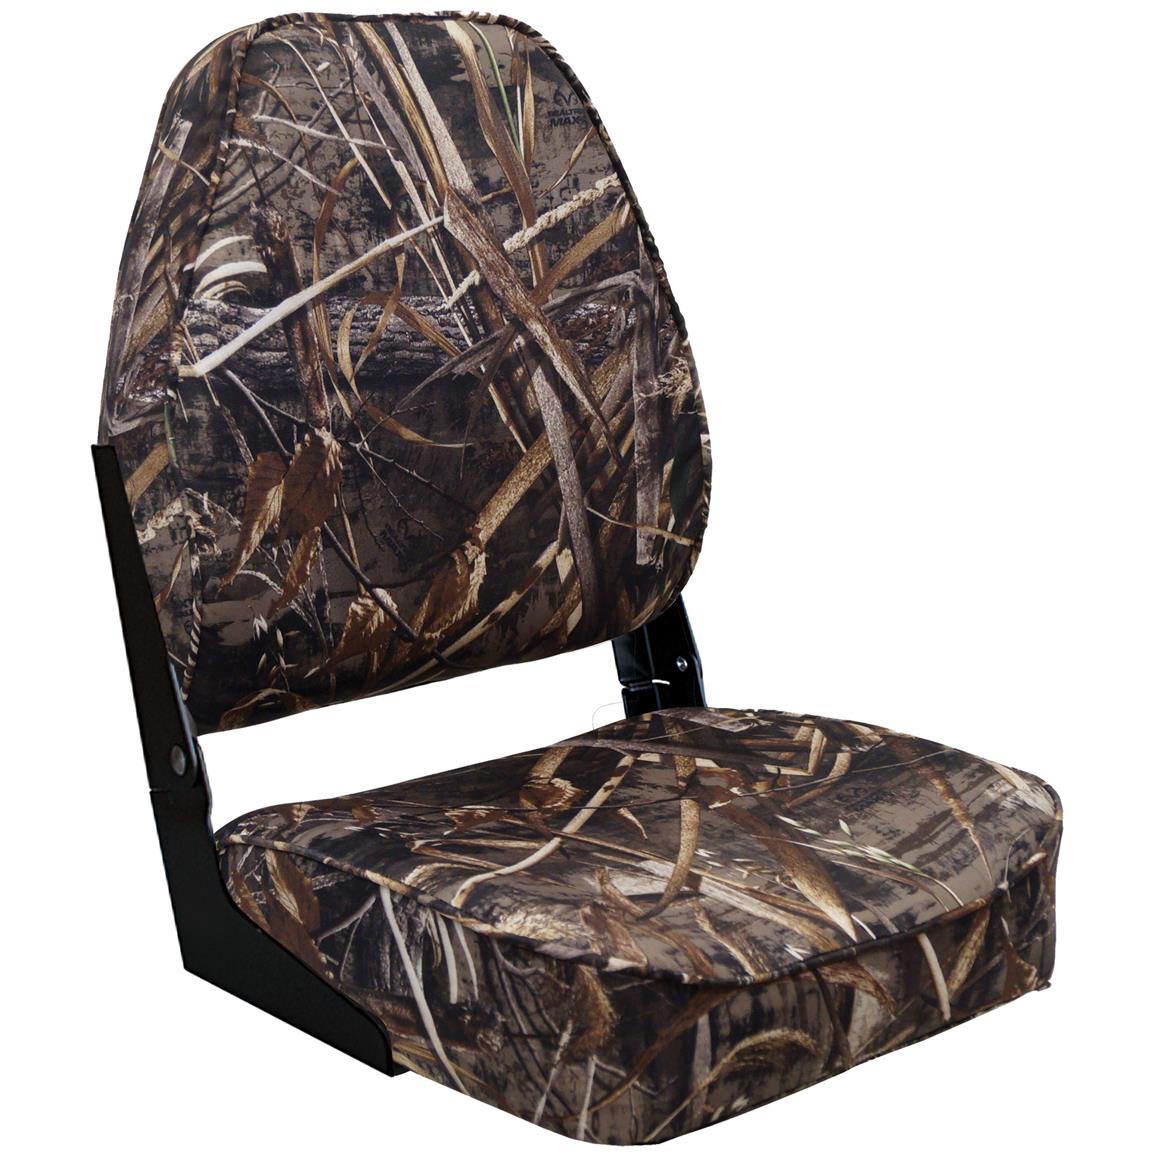 Wise High Back Camo Boat Seat, Realtree MAX-5